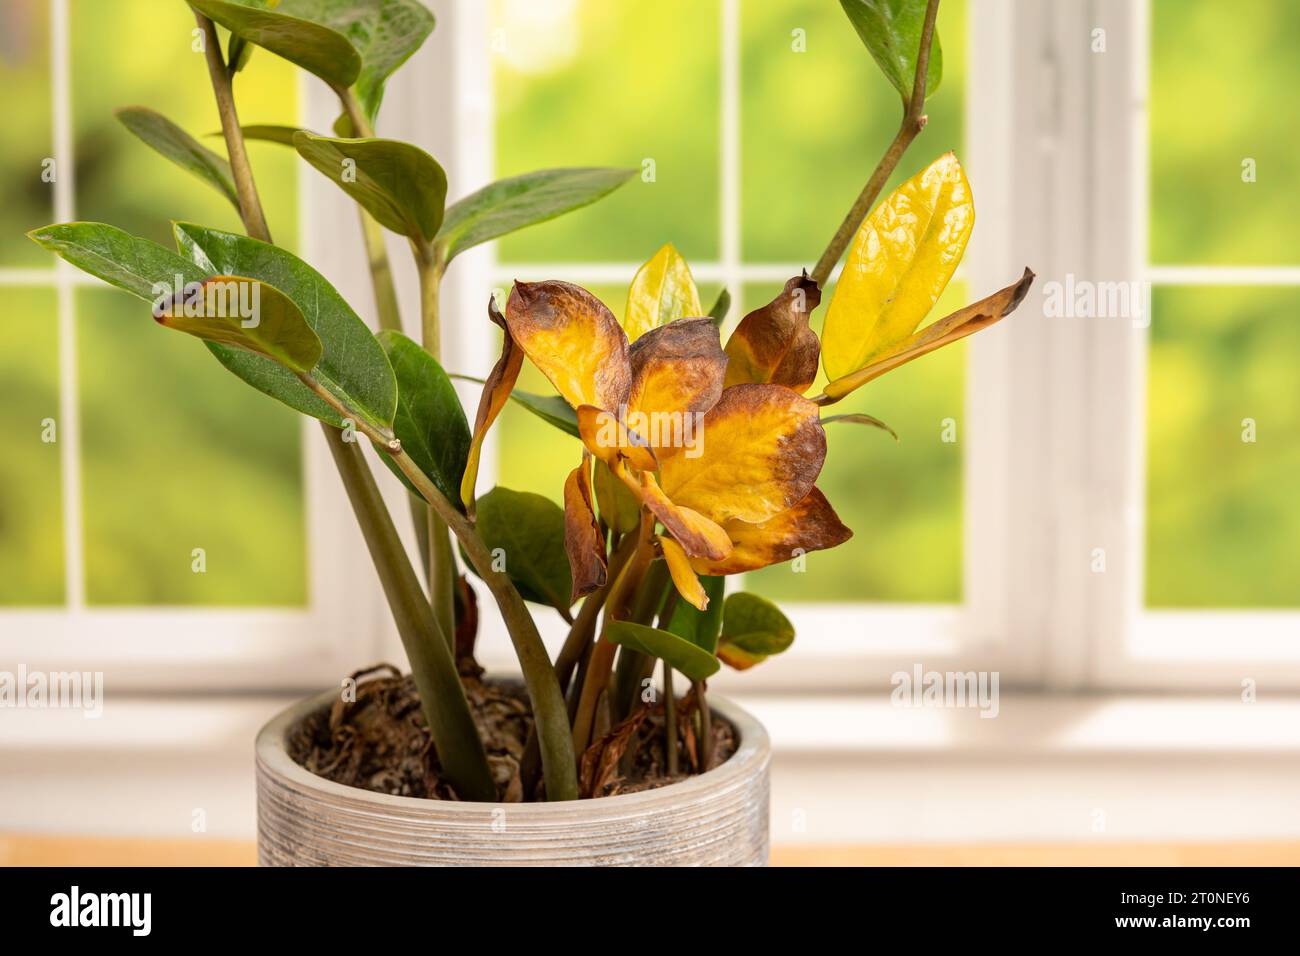 Indoor plant wilting with yellow leaves. Houseplant care, problems and gardening concept. Stock Photo